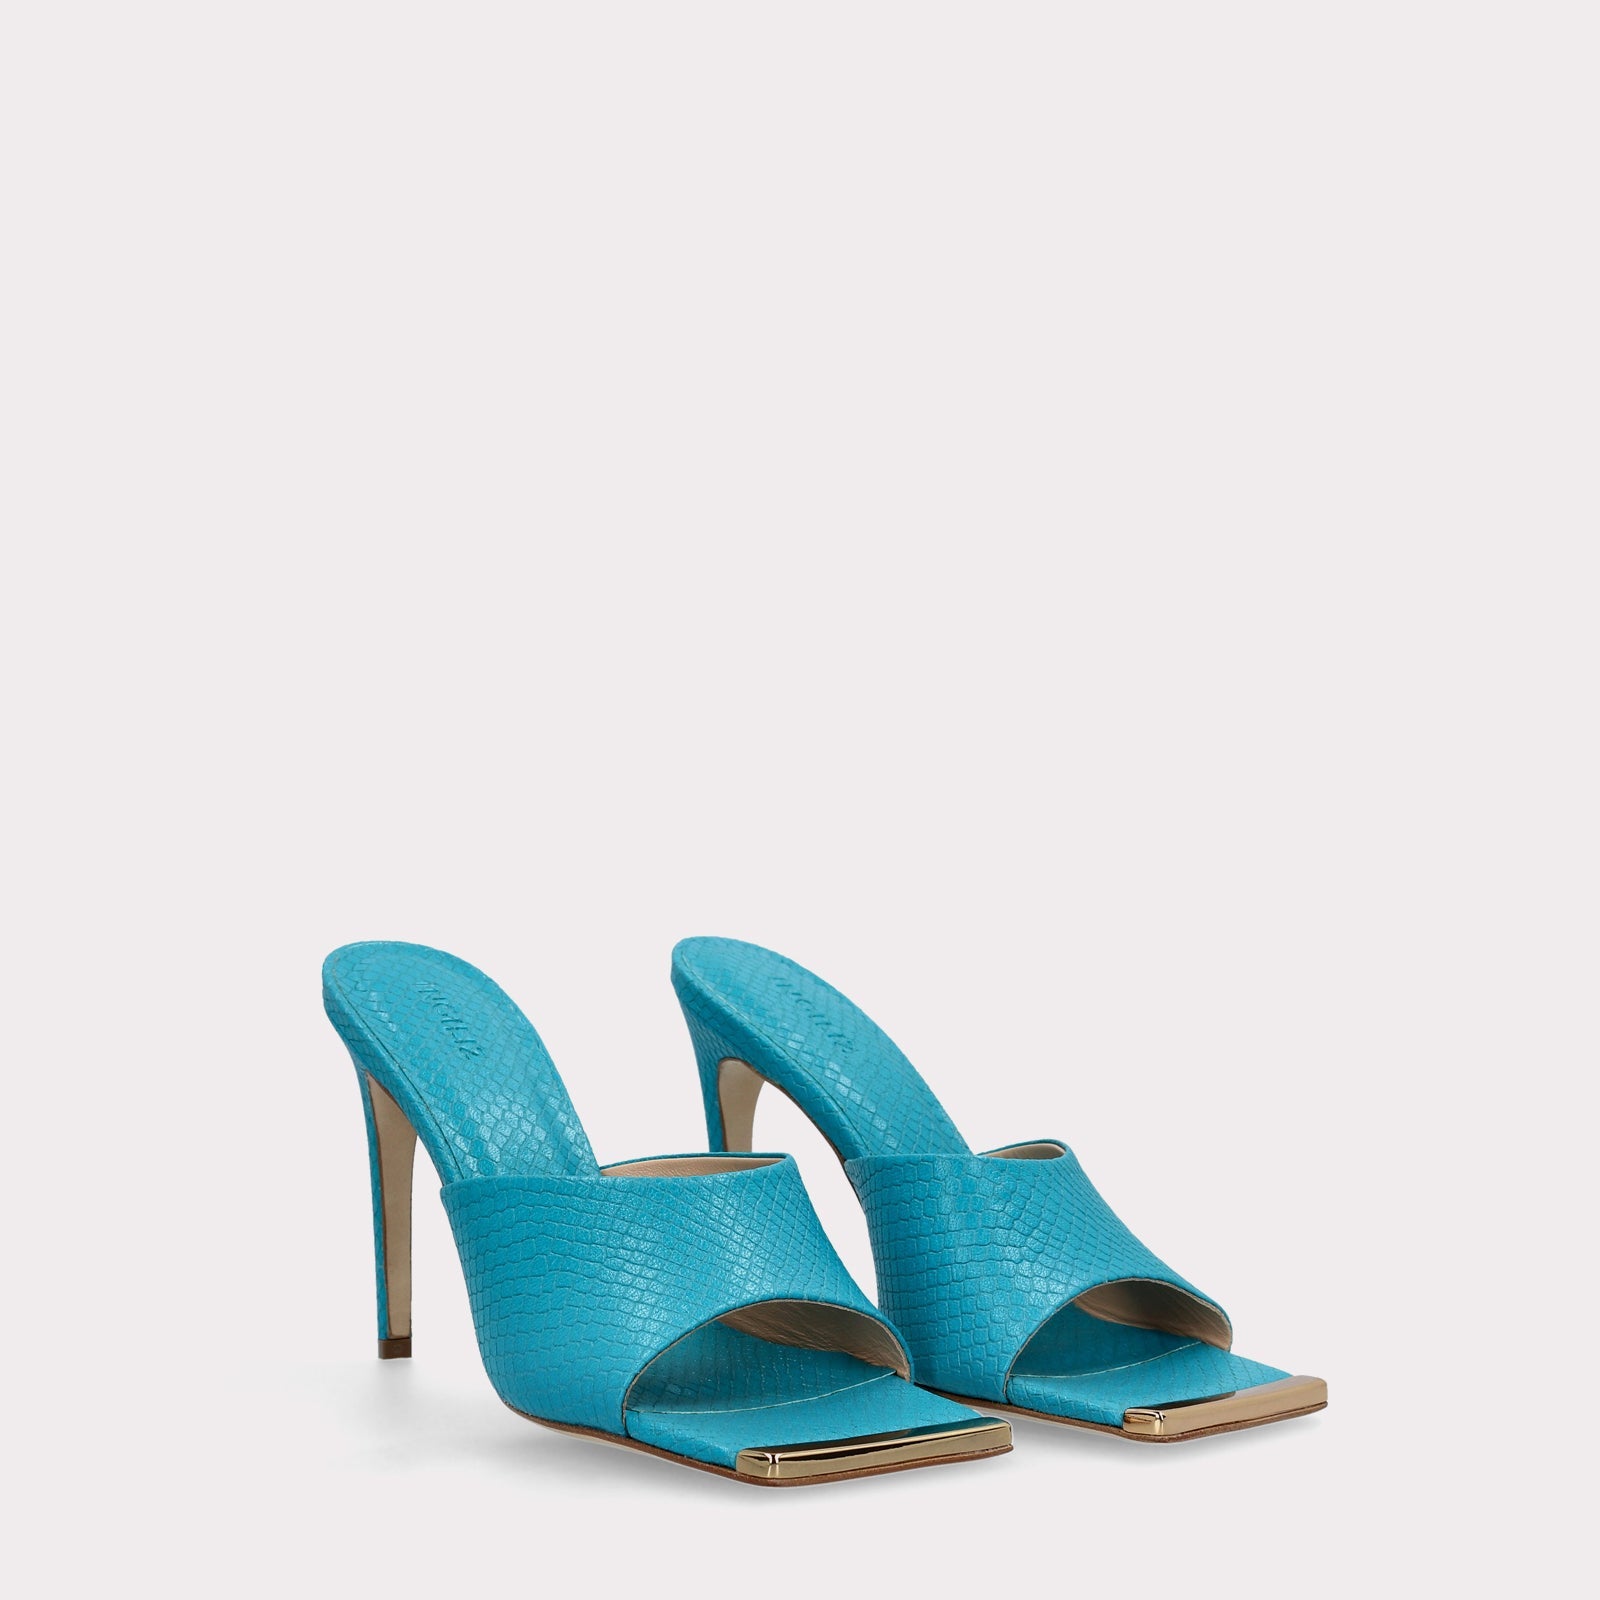 KALINA 05 SCUBA BLUE LIZZARD EMBOSSED LEATHER MULES